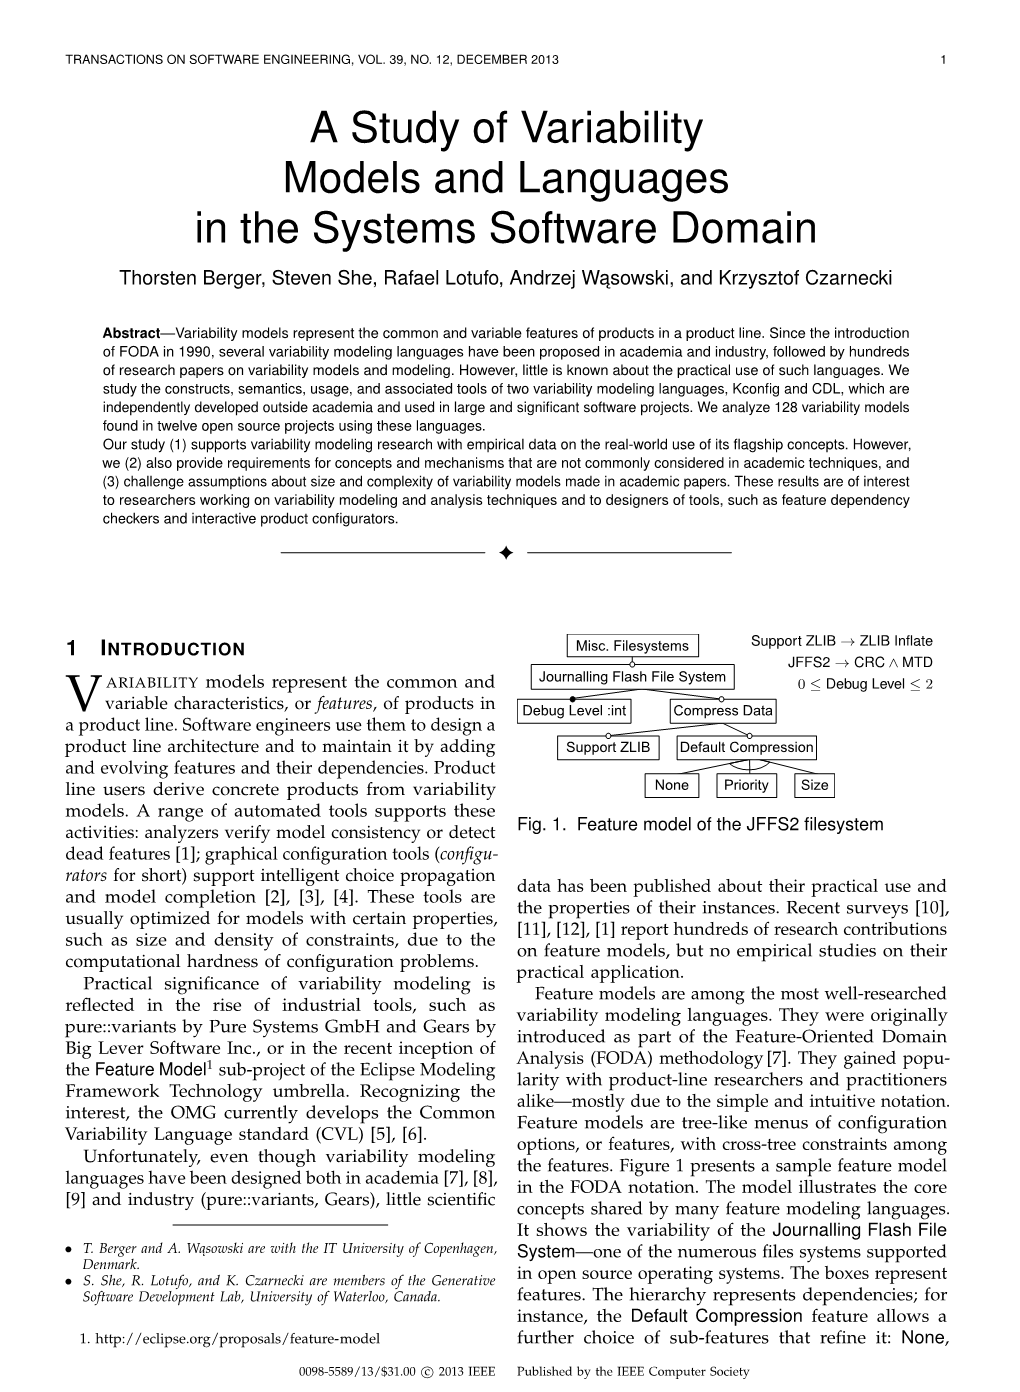 A Study of Variability Models and Languages in the Systems Software Domain Thorsten Berger, Steven She, Rafael Lotufo, Andrzej W ˛Asowski, and Krzysztof Czarnecki